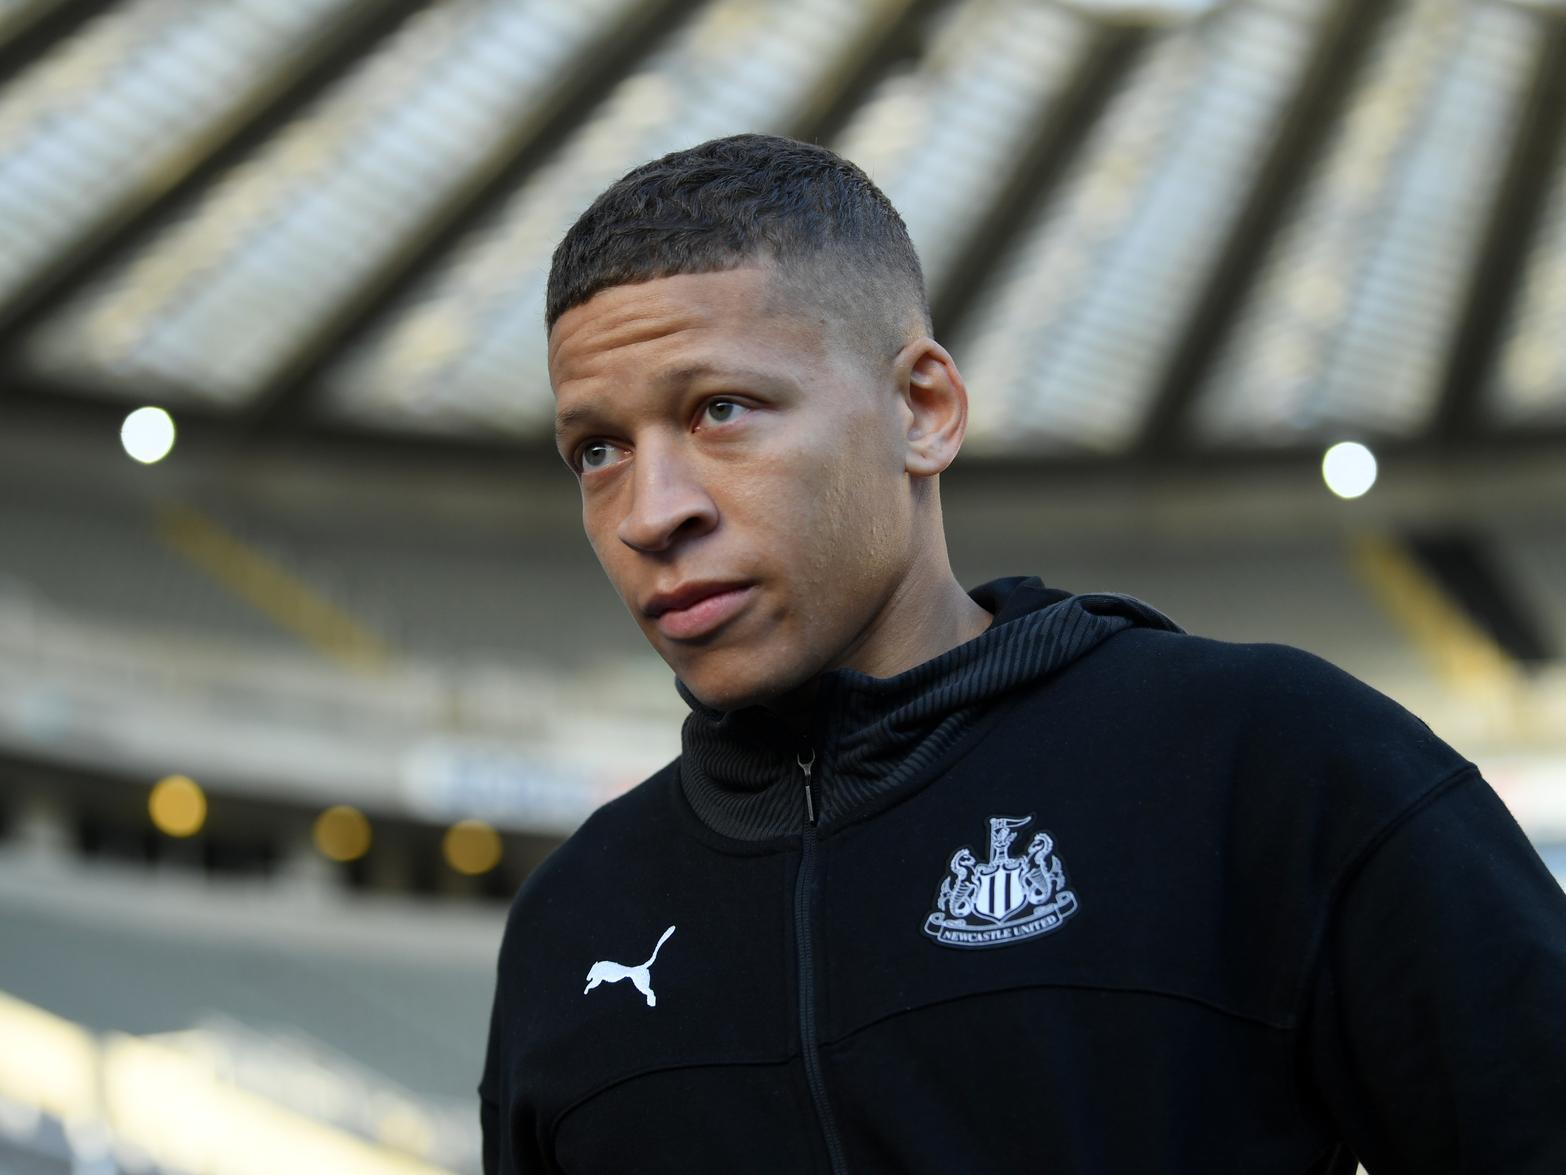 Newcastle United are rumoured to be ready to accept offers in the region of 15m for their strikerDwight Gayle,who is said to be a target of Leeds United after scoring 24 goals on loan with West Brom last season. (Telegraph)